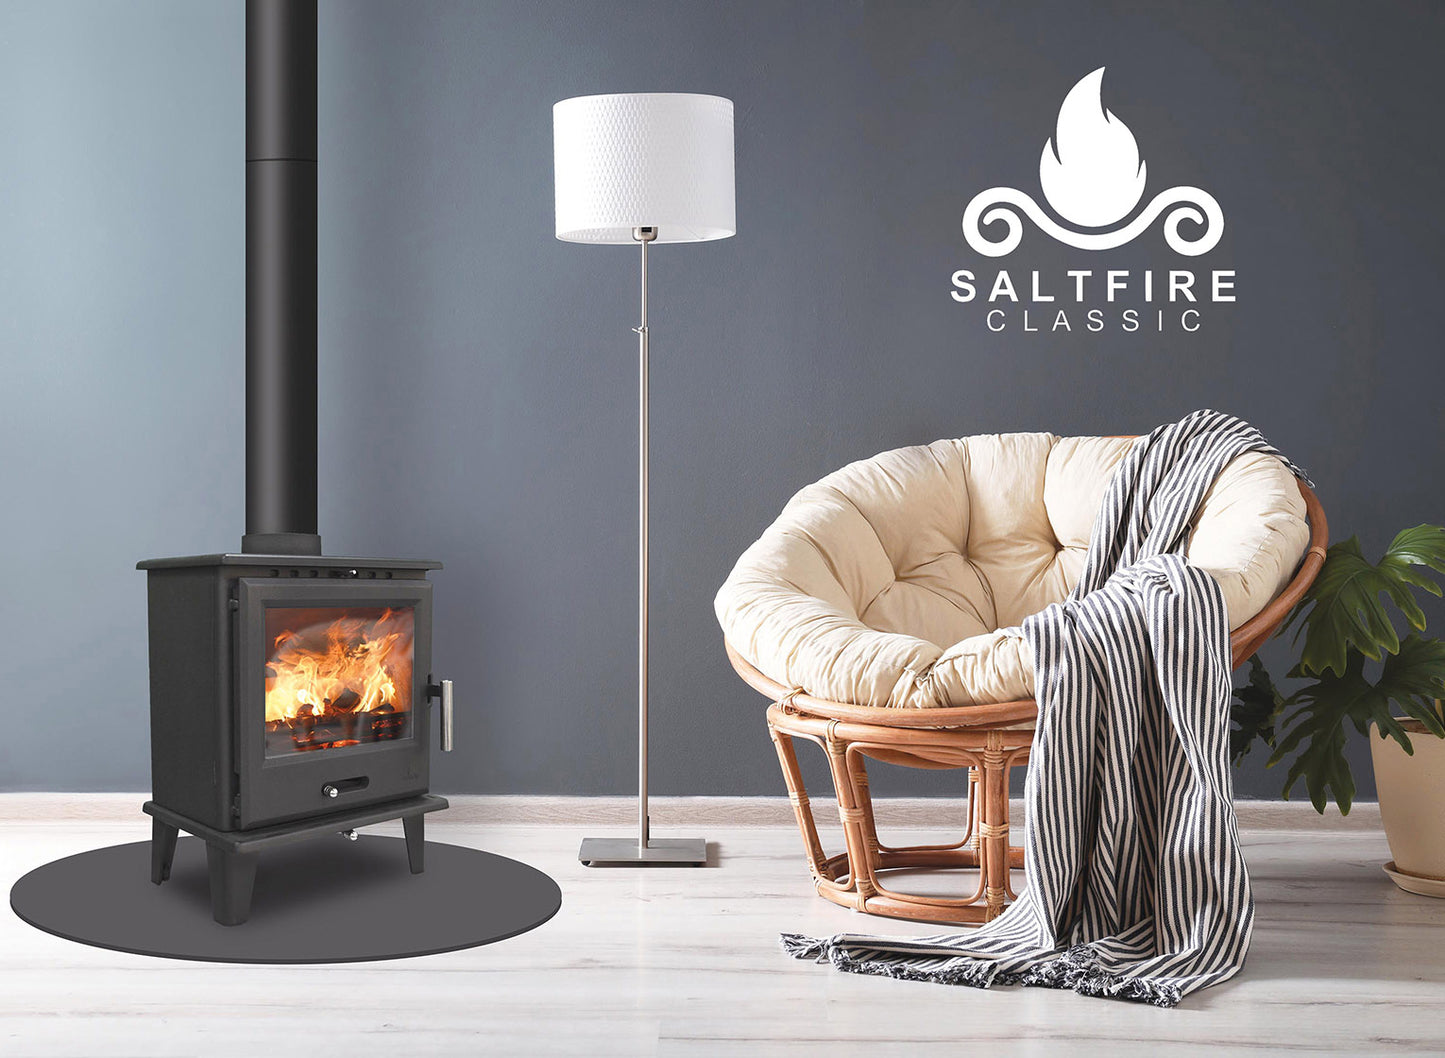 The stunning Saltfire Classic will add sophistication to an interior